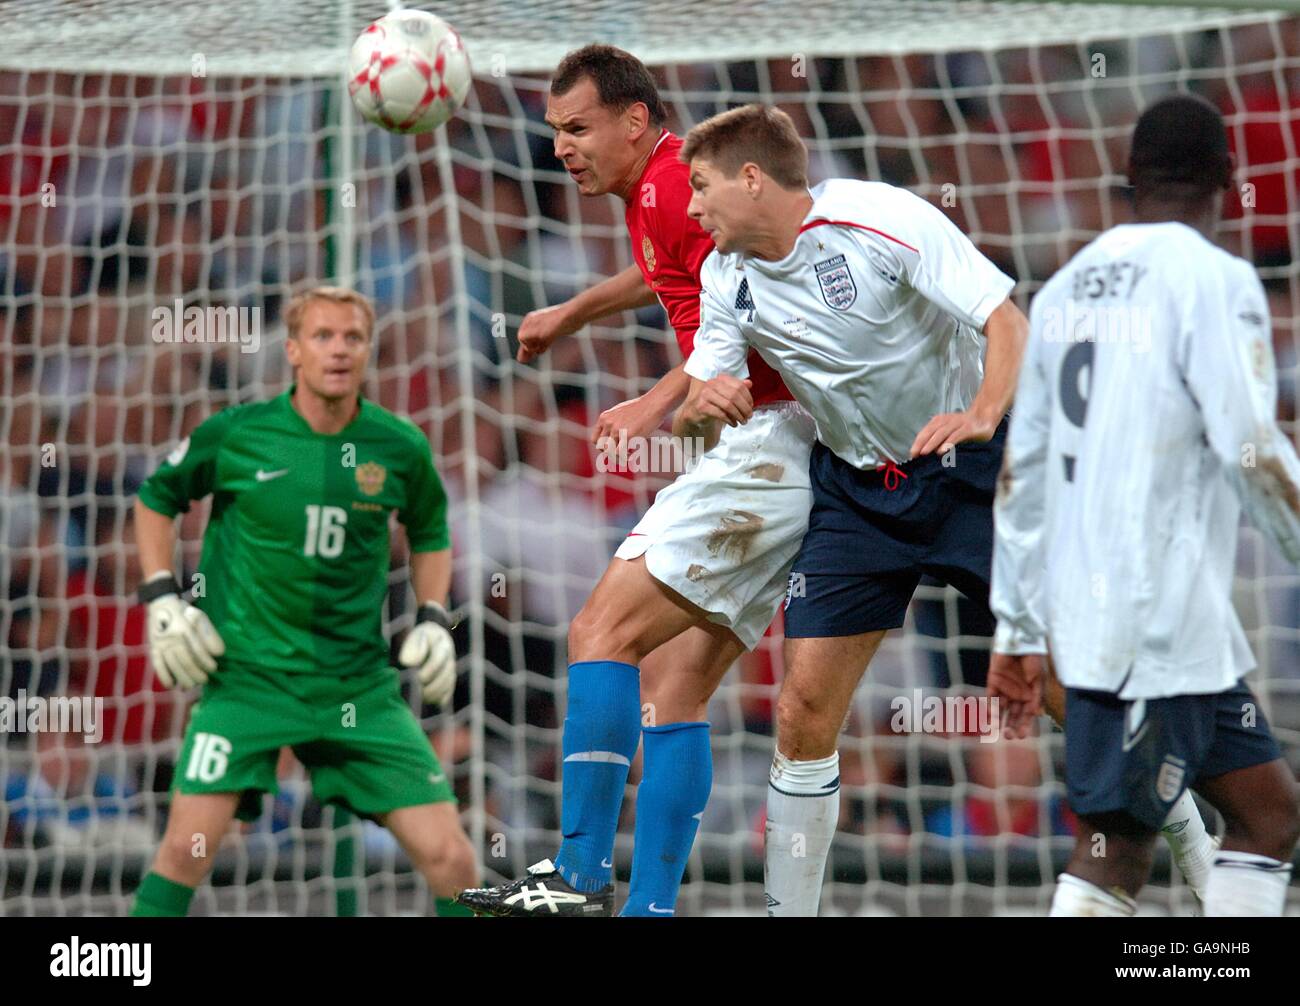 Soccer - UEFA European Championship 2008 Qualifying - Group E - England v Russia - Wembley Stadium. Russia's Sergei Ignashevich and England's Steven Gerrard jump for the header Stock Photo